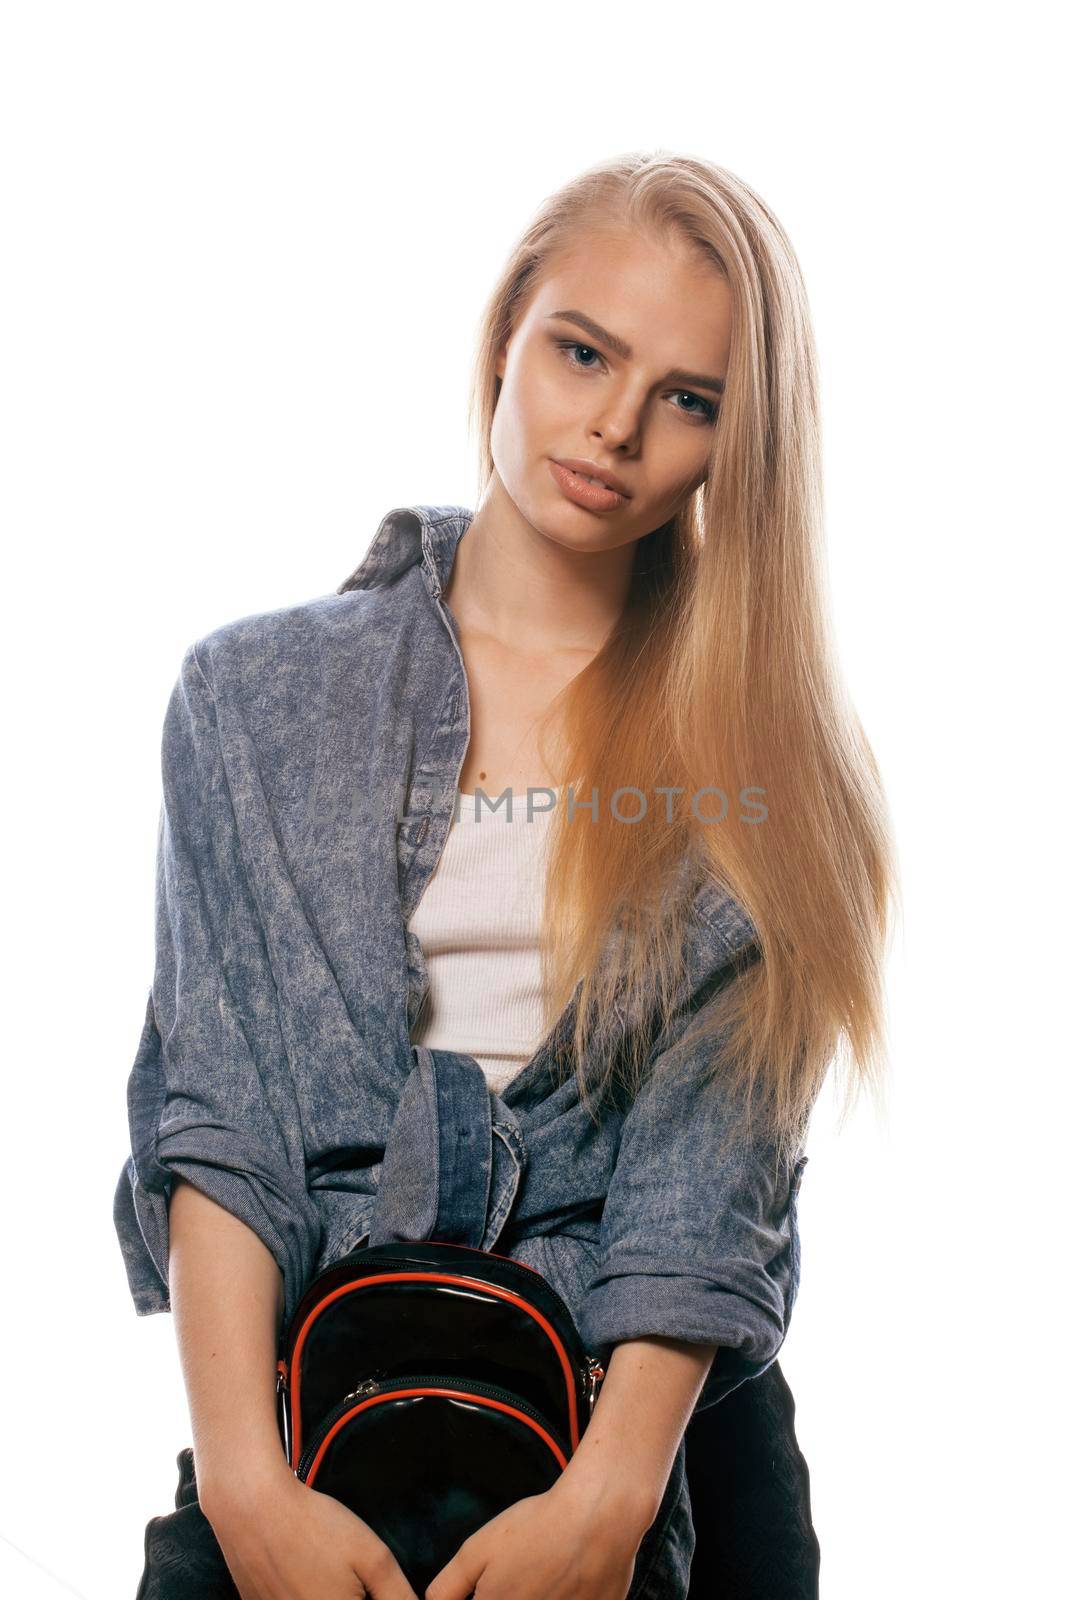 young blond real woman on white backgroung gesture thumbs up, isolated emotional posing close up